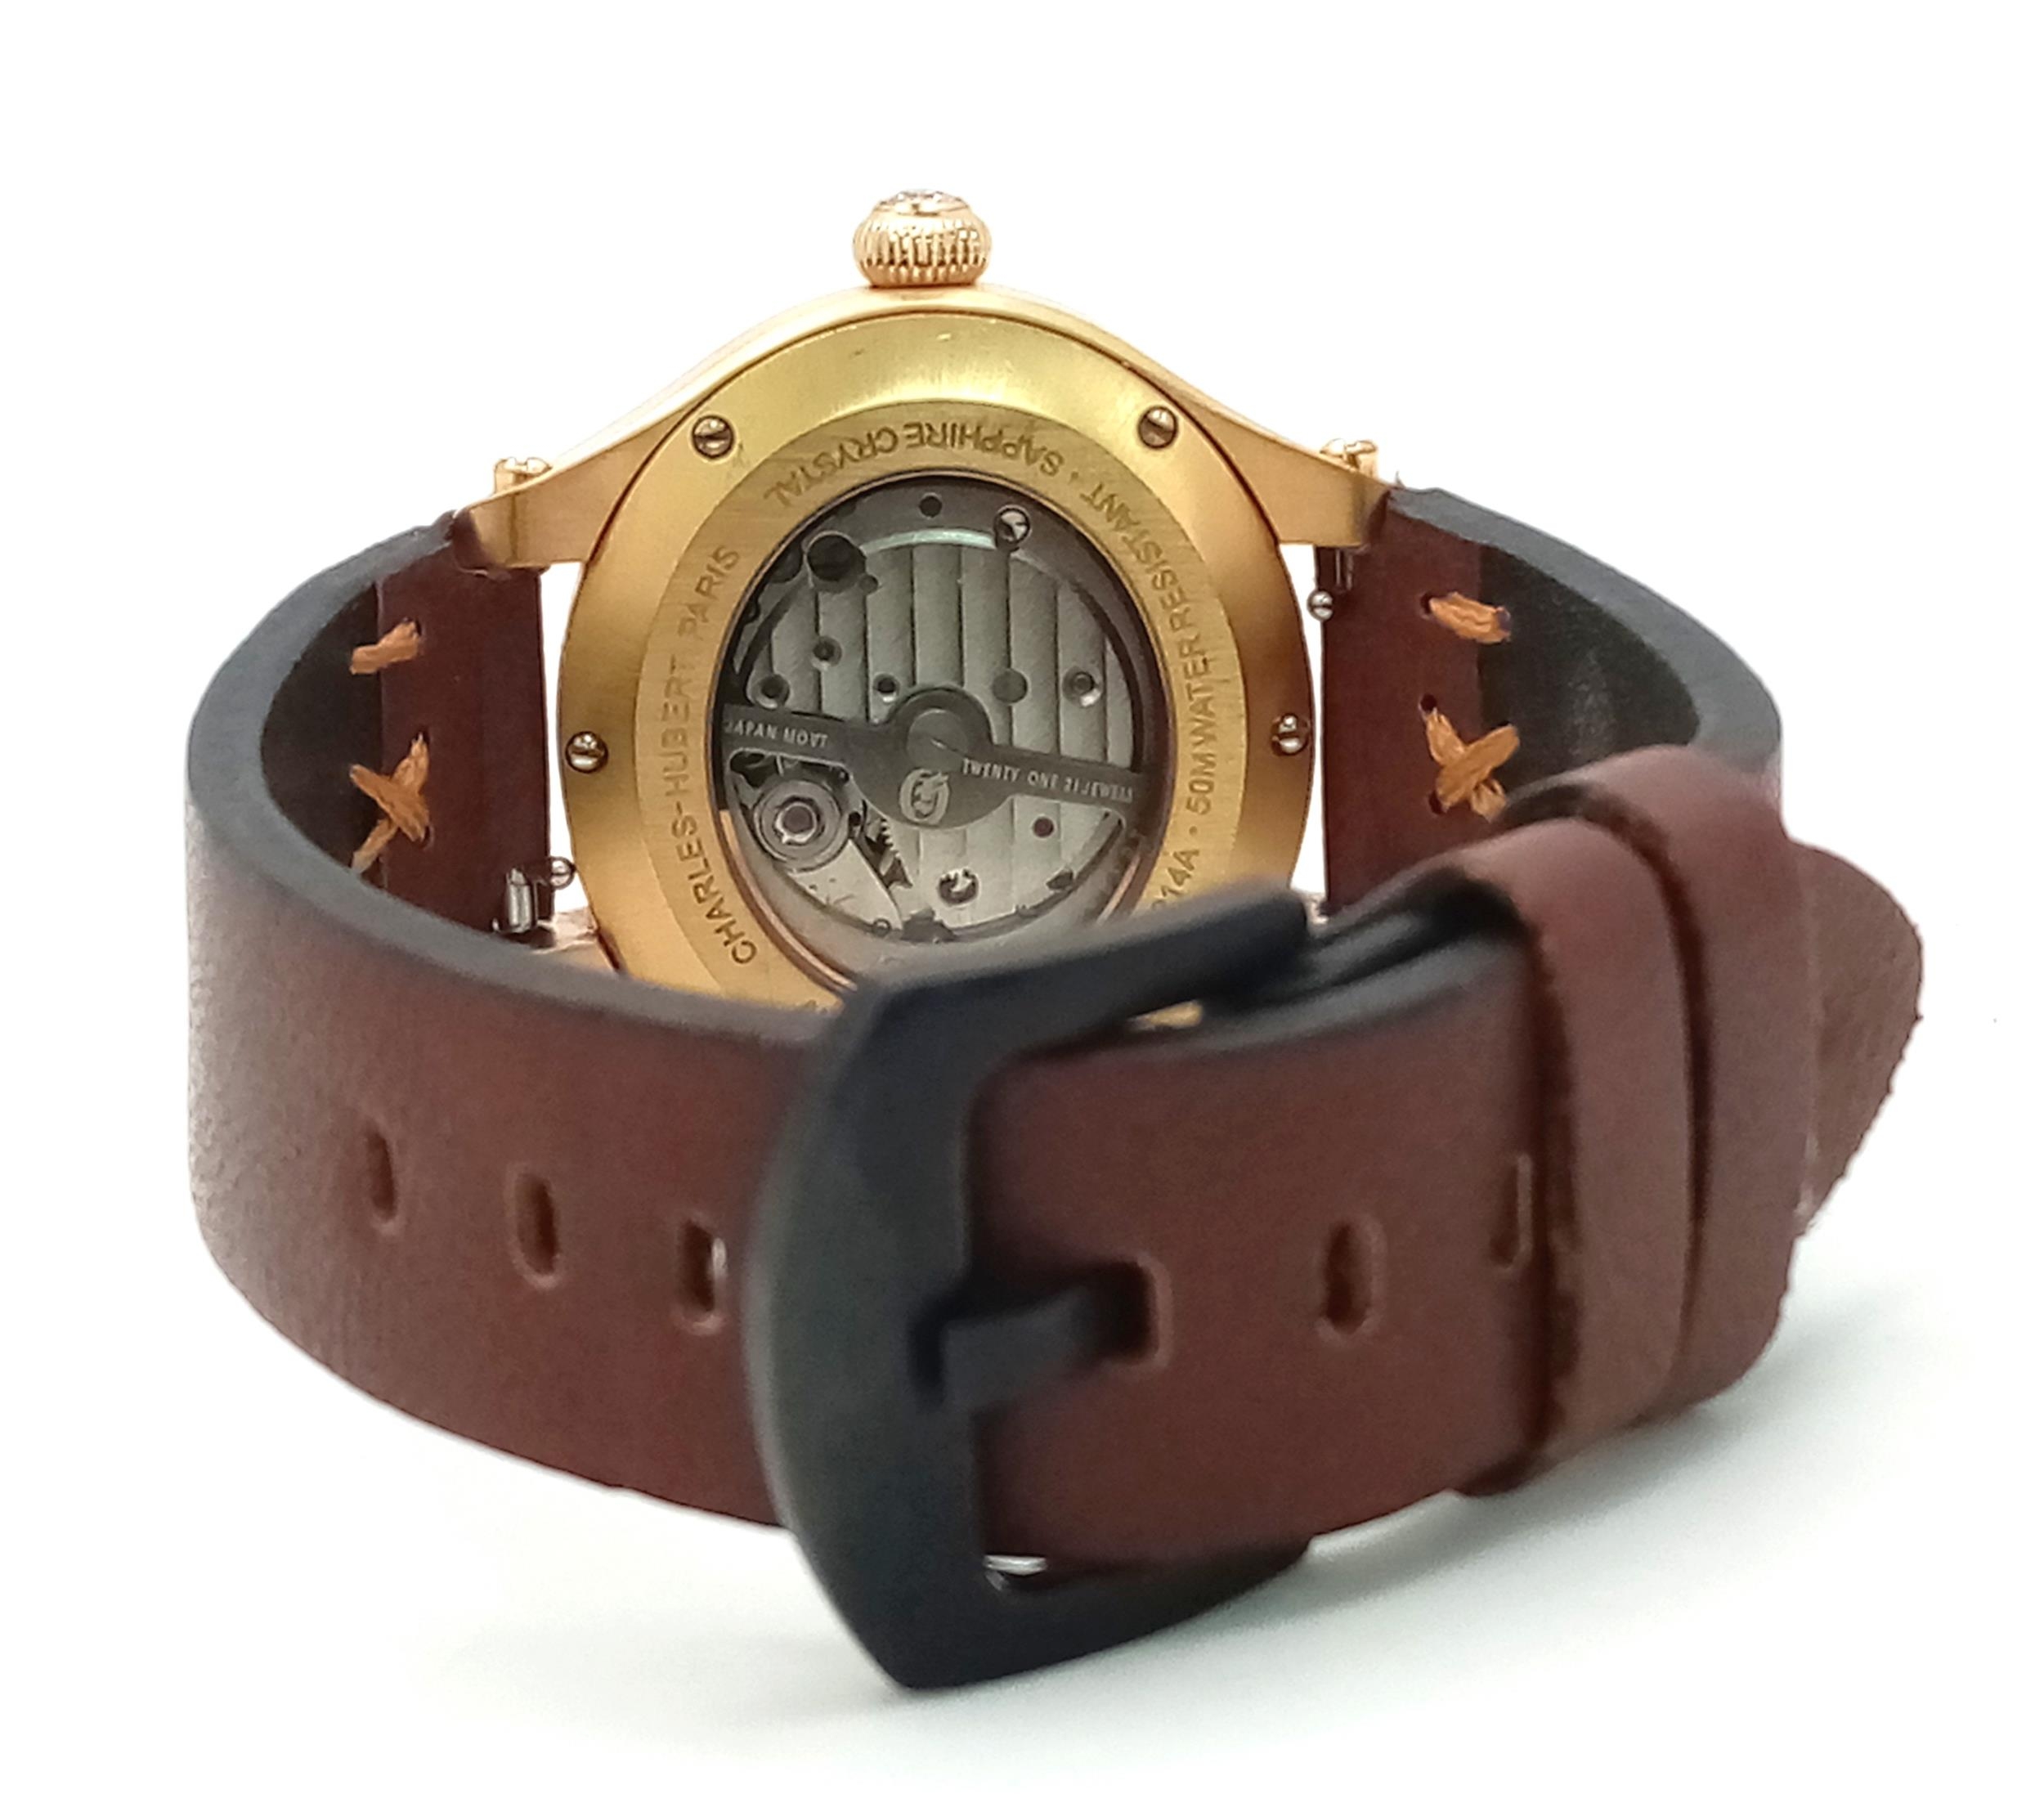 A Charles Hubert Automatic Gents Watch. Brown leather strap. Oval gilded case - 38mm. White dial - Image 5 of 5